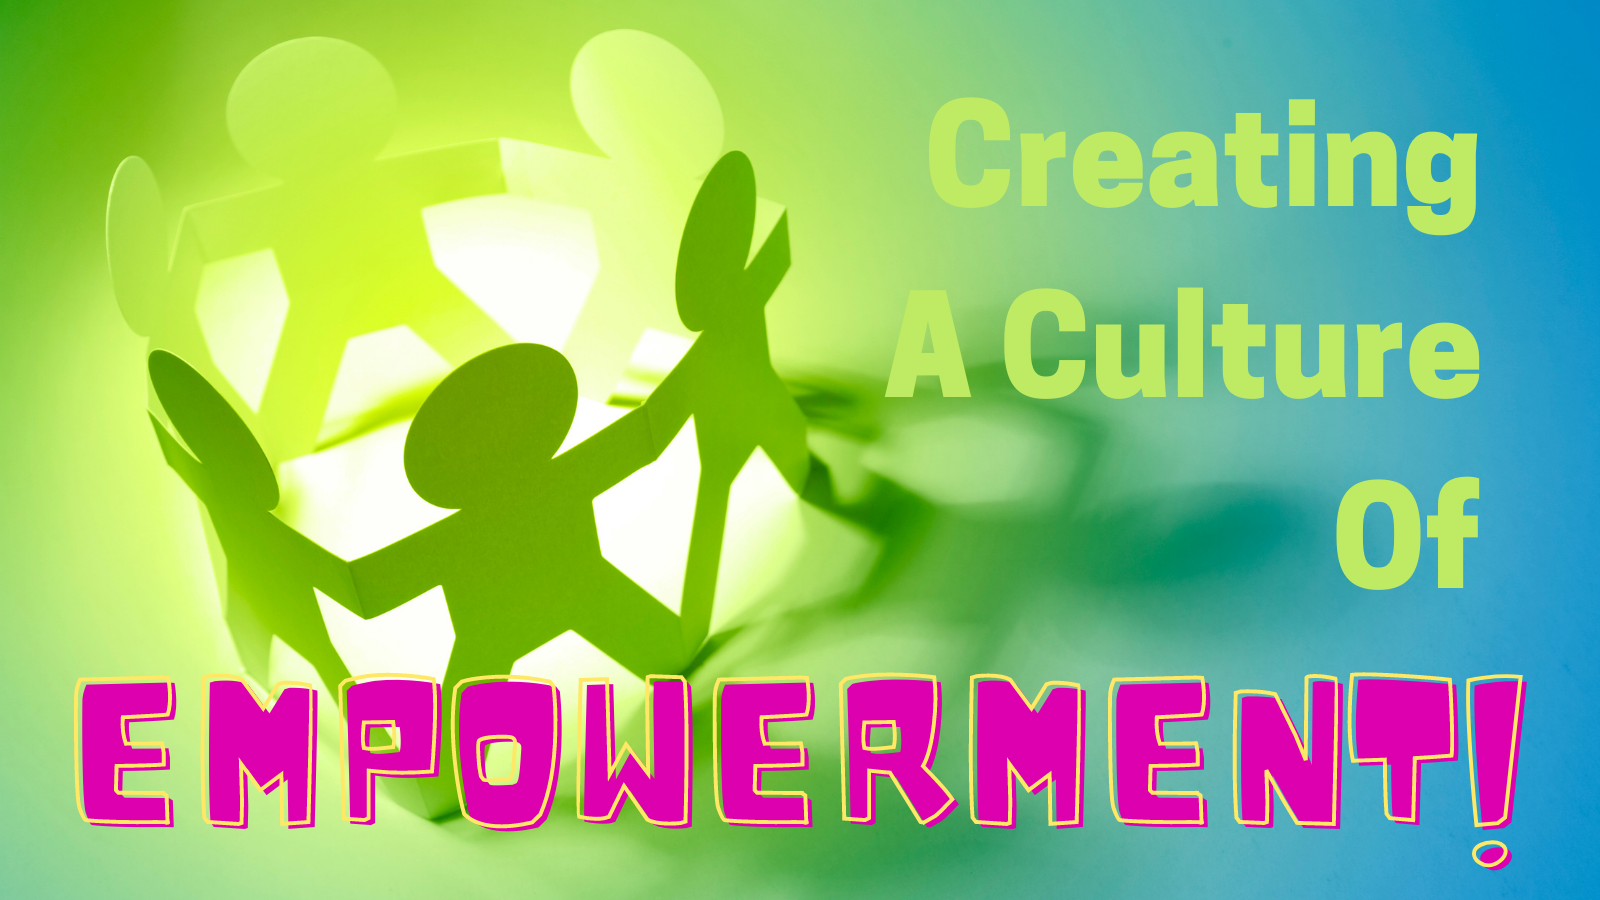 Creating a culture of Empowerment